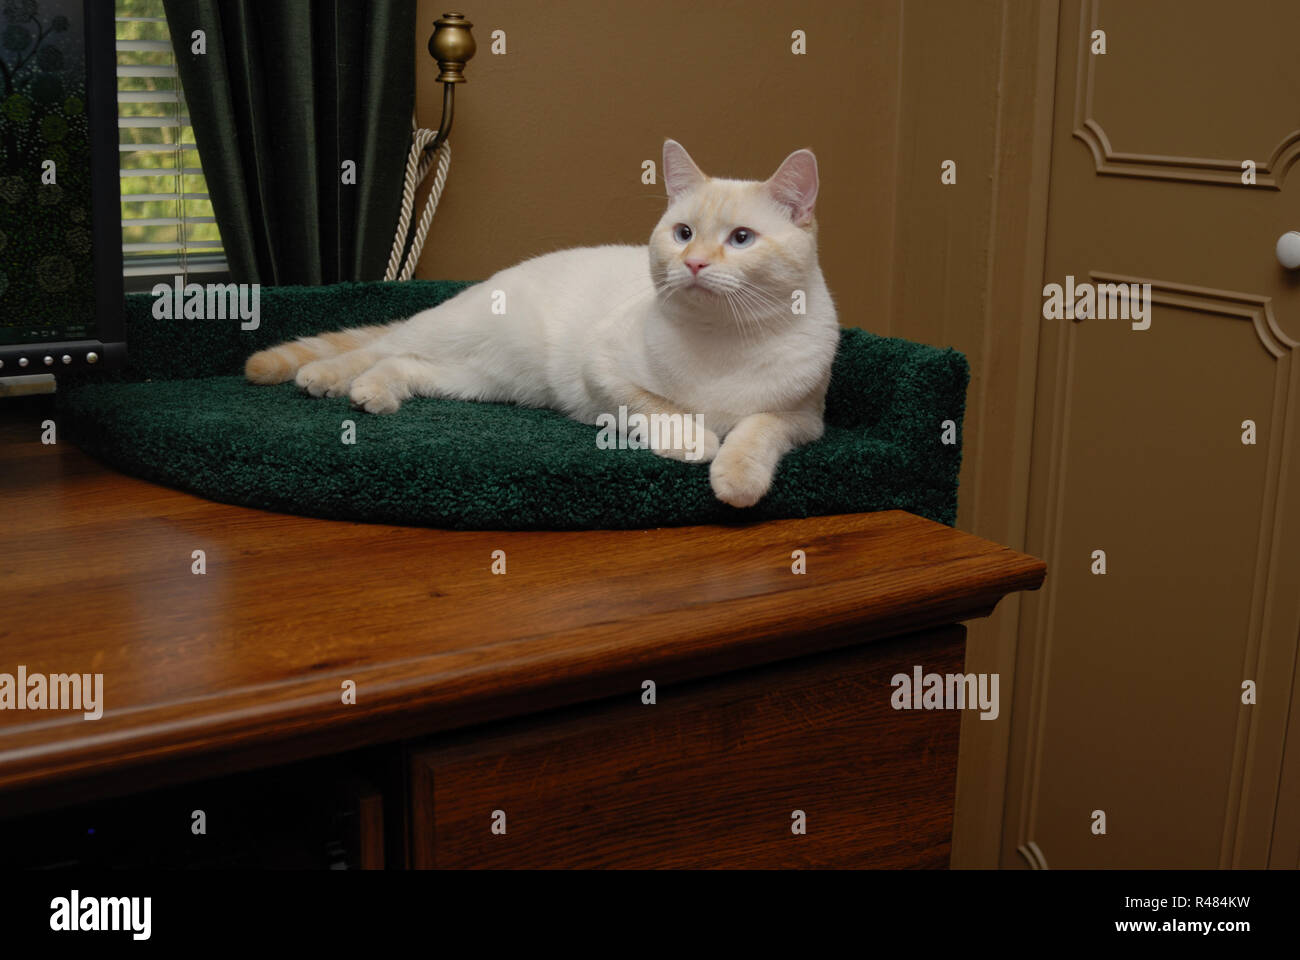 A White Flamepoint Siamese Cat Lounges In A Carpeted Bed On The